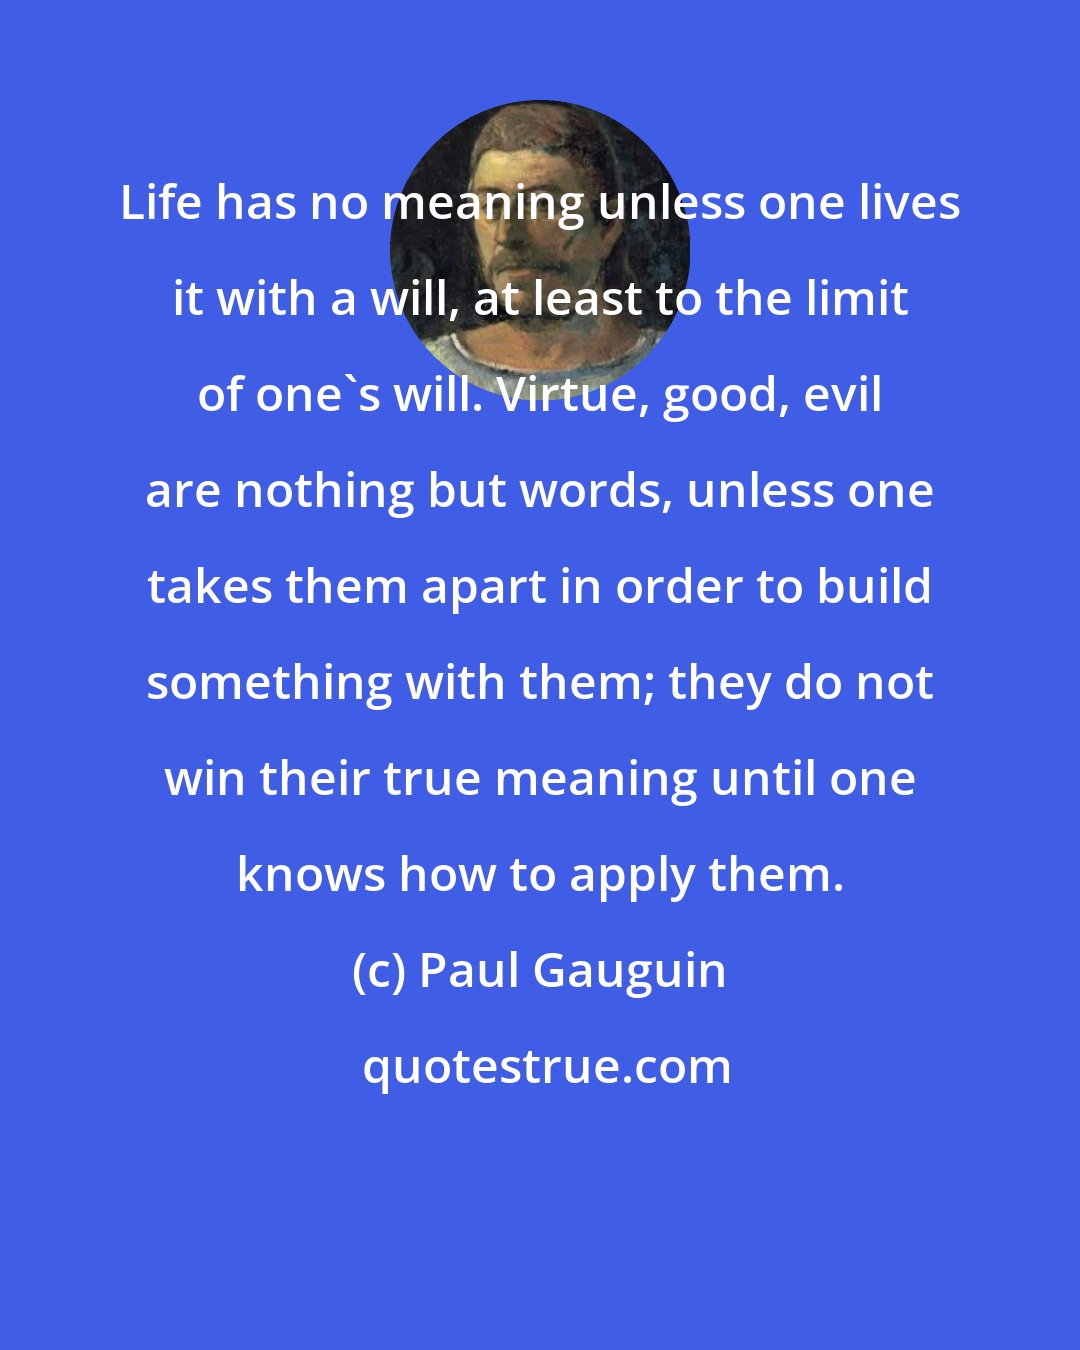 Paul Gauguin: Life has no meaning unless one lives it with a will, at least to the limit of one's will. Virtue, good, evil are nothing but words, unless one takes them apart in order to build something with them; they do not win their true meaning until one knows how to apply them.